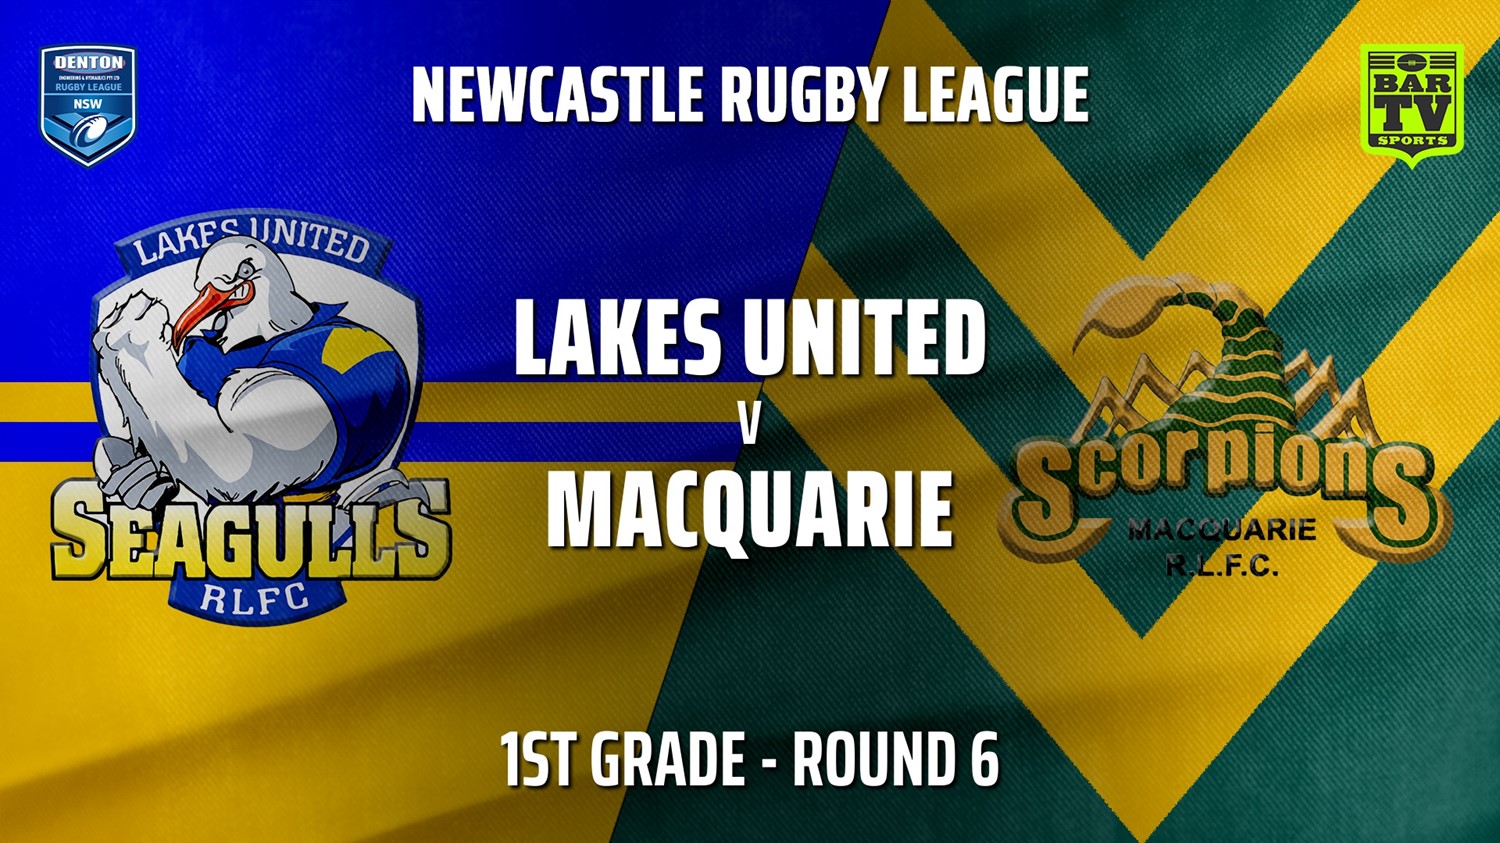 210502-Newcastle Rugby League Round 6 - 1st Grade - Lakes United v Macquarie Scorpions Minigame Slate Image